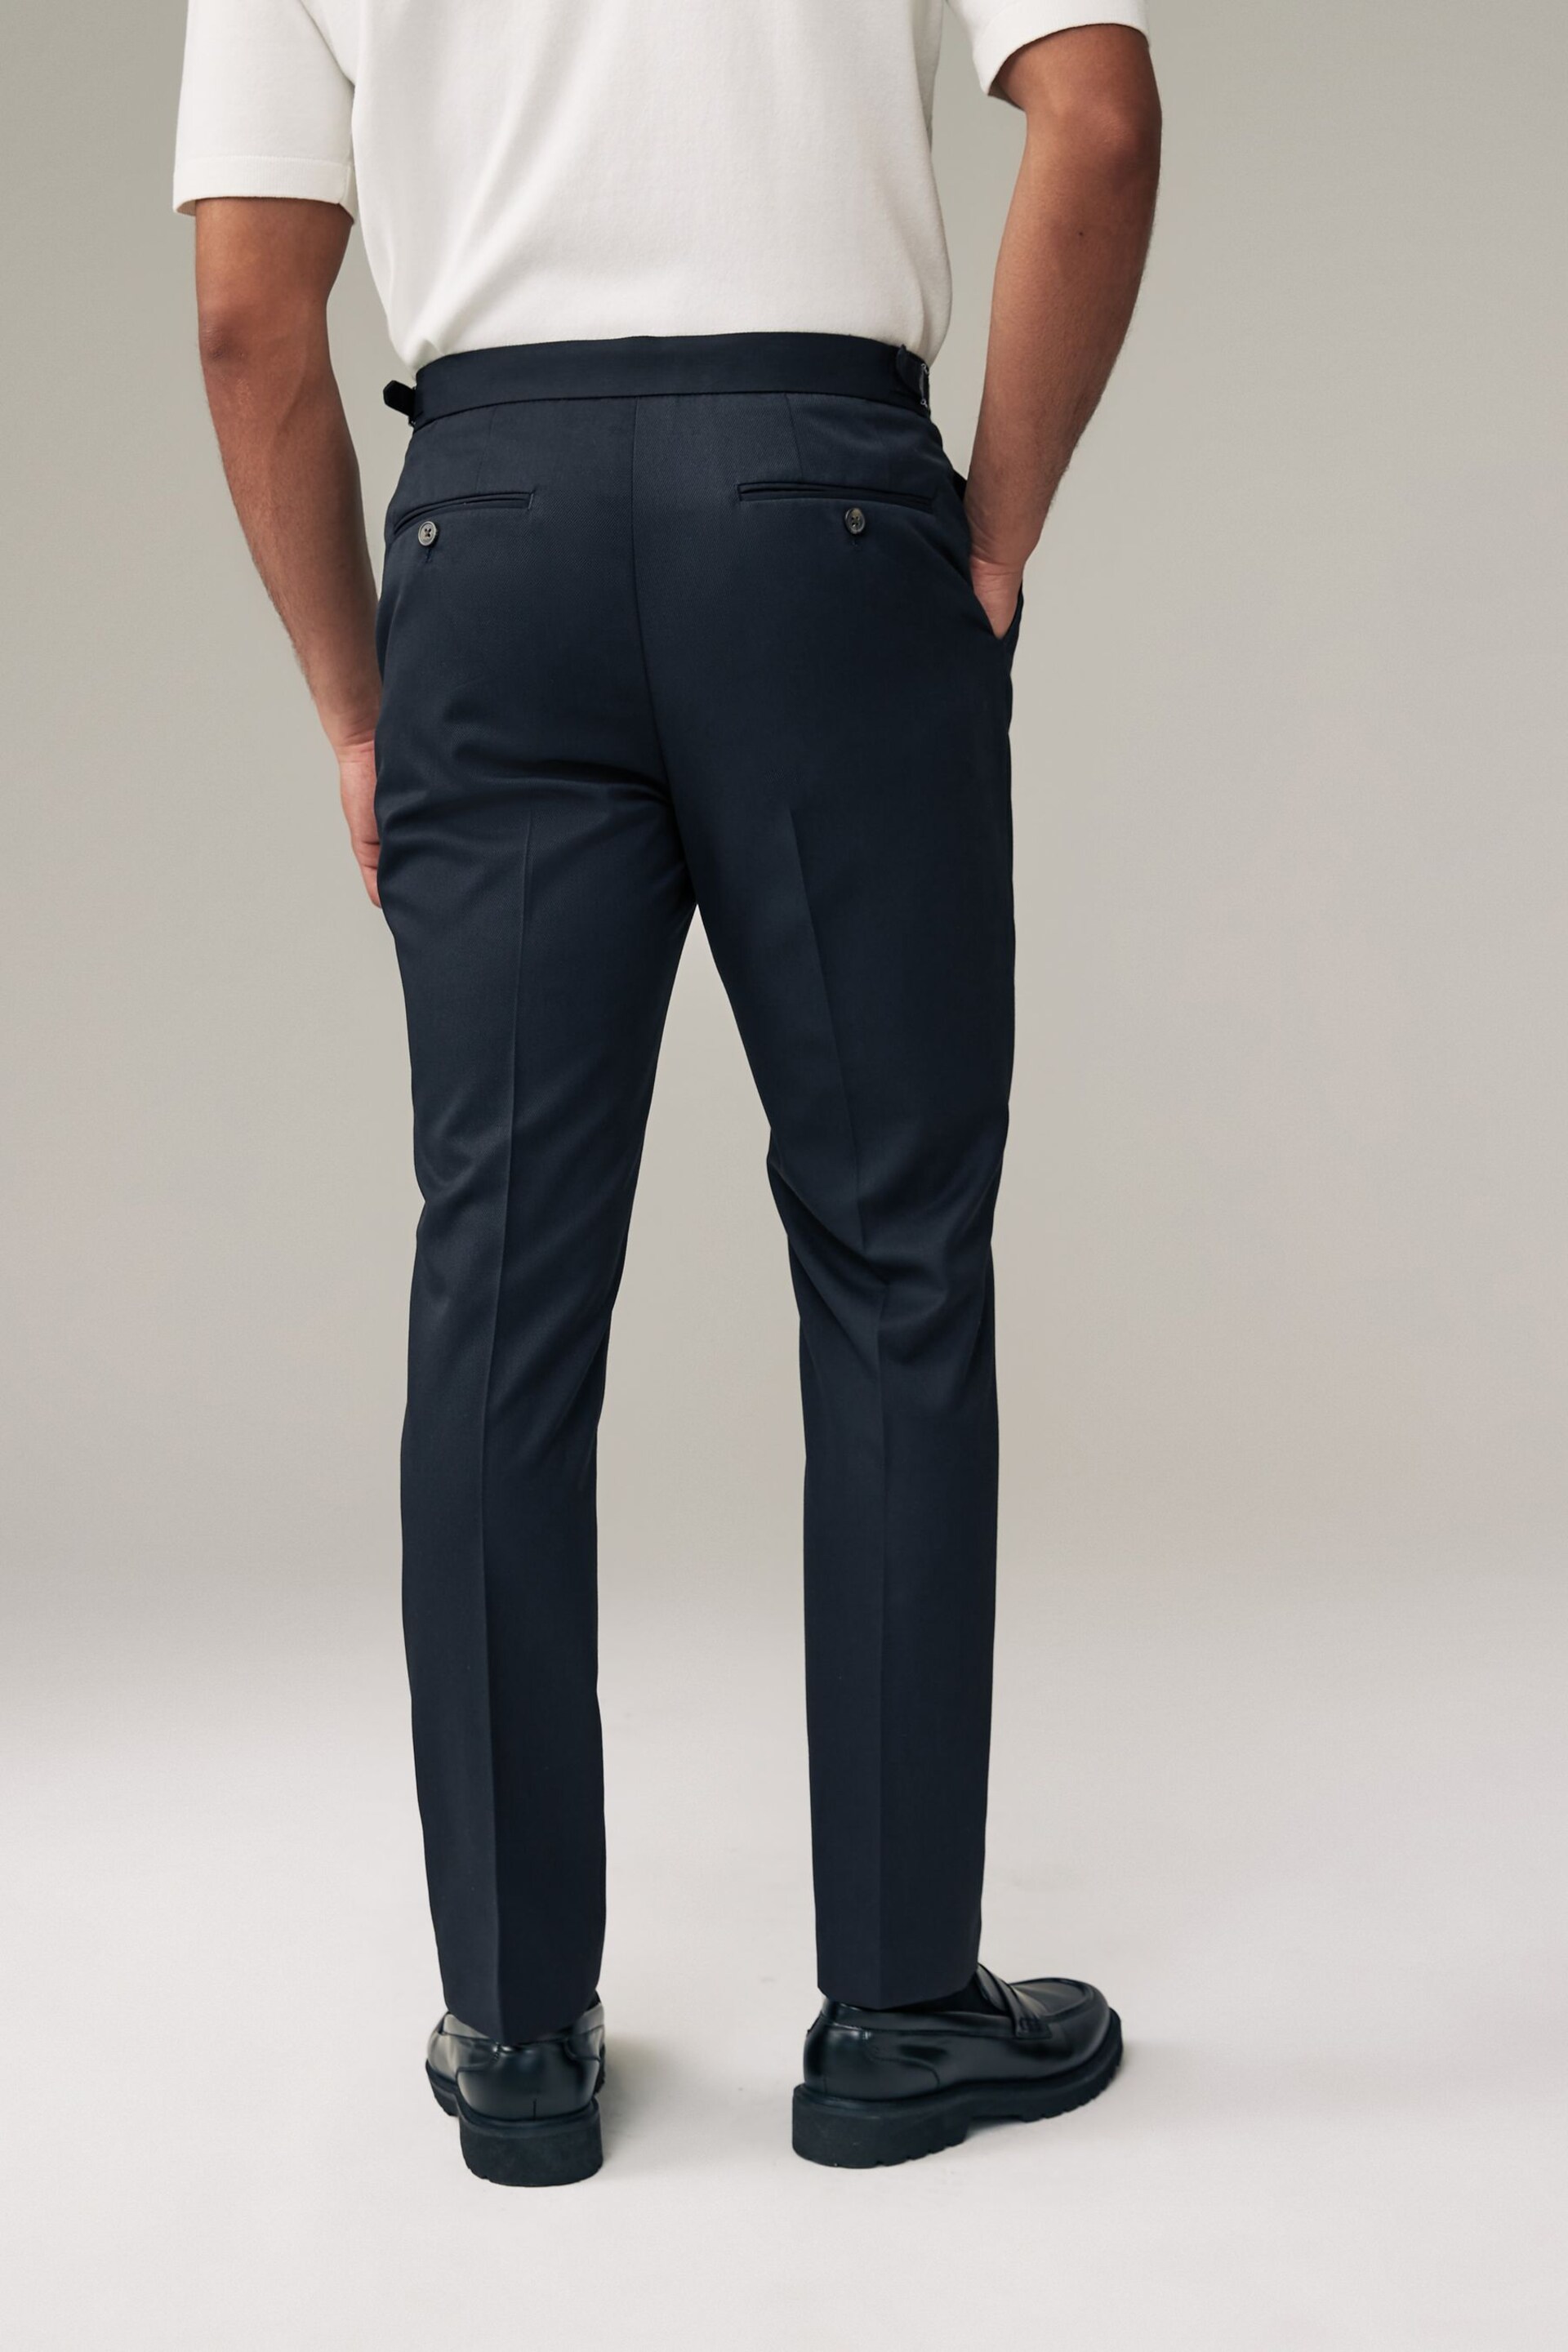 Navy Blue Slim Fit Smart Twill Side Adjuster Trousers - Image 4 of 9